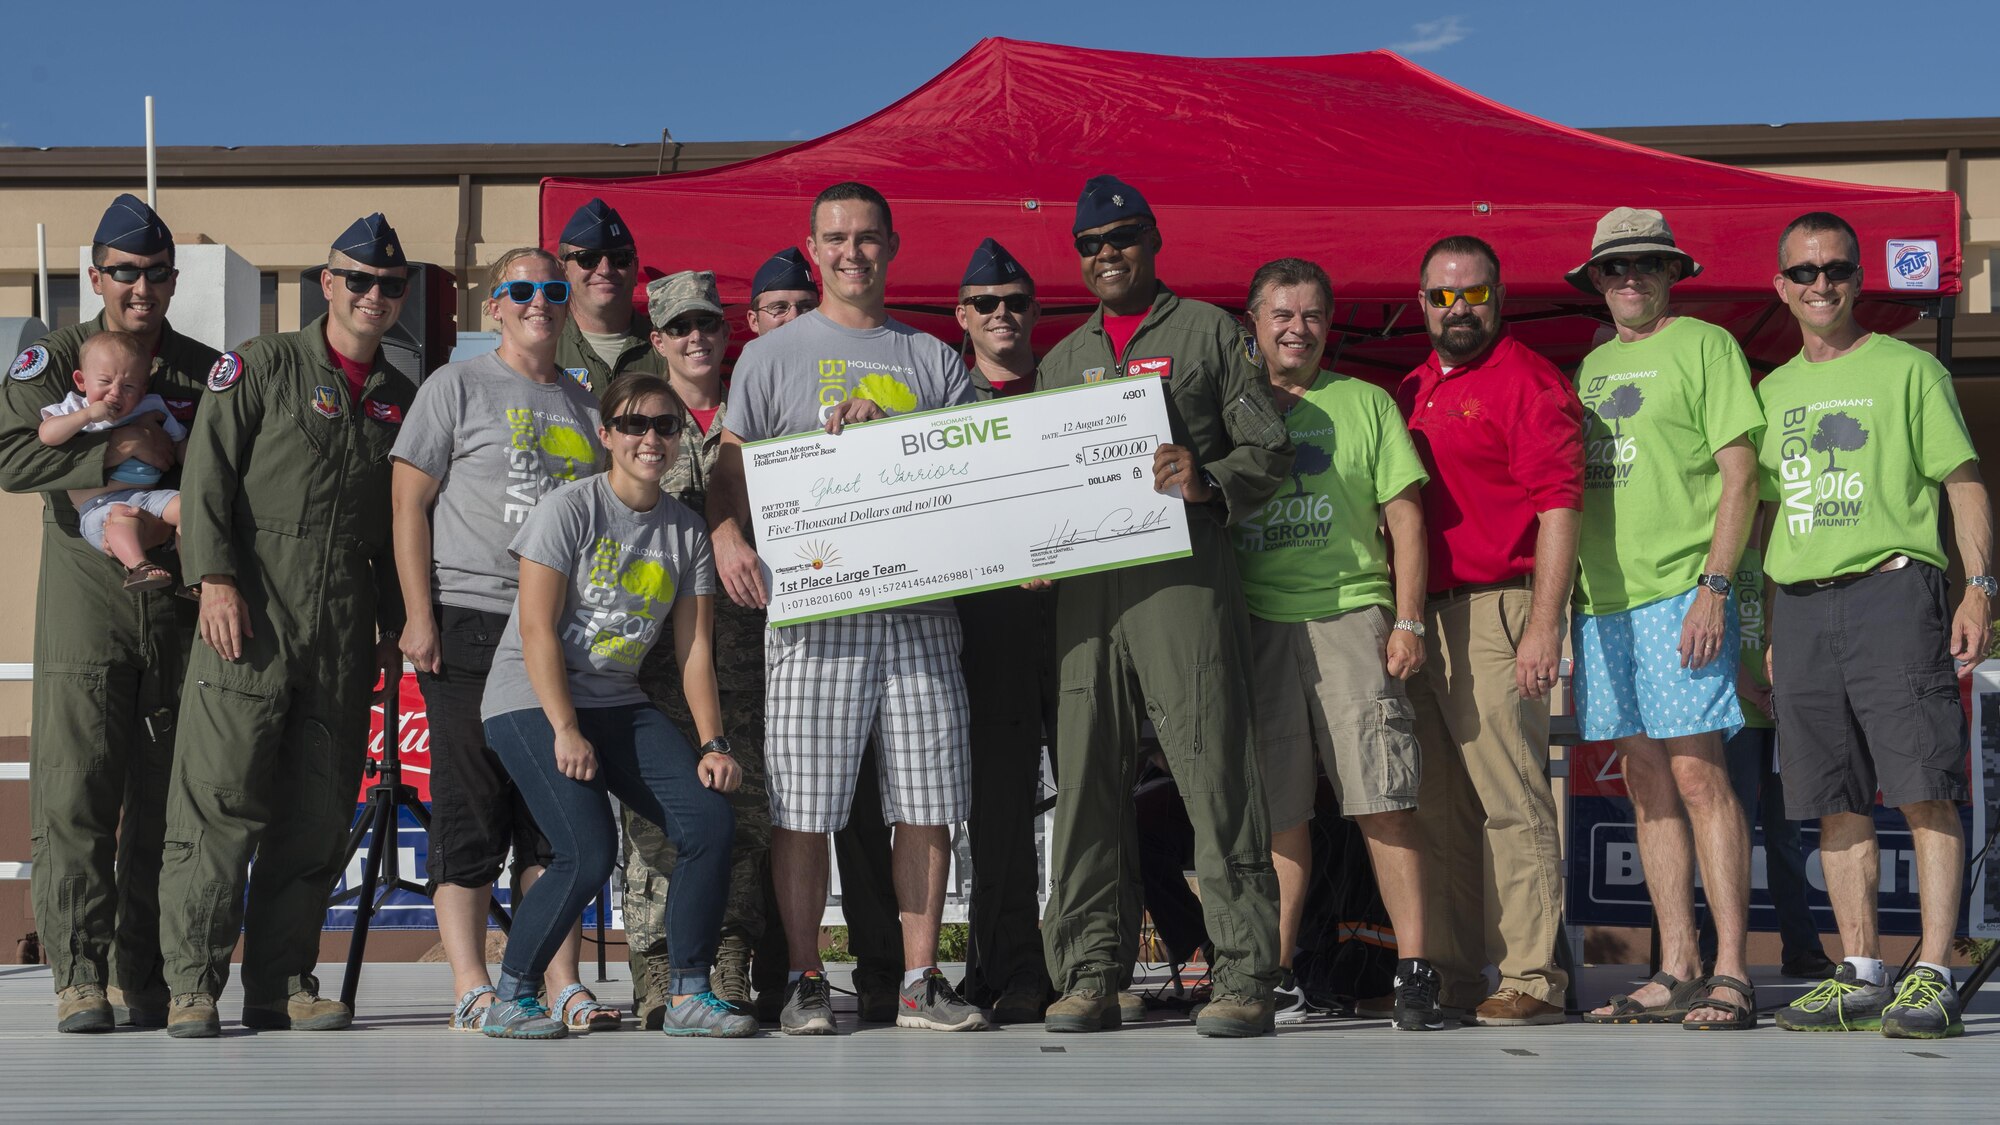 Members from the 29th Attack Squadron’s team, Ghost Warriors, receive their $5,000 reward for winning the First Place Large Team Award at the Big Give after-party August 12, 2016 at Holloman Air Force Base, N.M. Over the course of three weeks, 32 teams of 412 participants spent nearly 5,000 man hours volunteering in the local community — saving the area $202,092.33. (Last names are being withheld due to operational requirements. U.S. Air Force photo by Airman 1st Class Randahl J. Jenson)